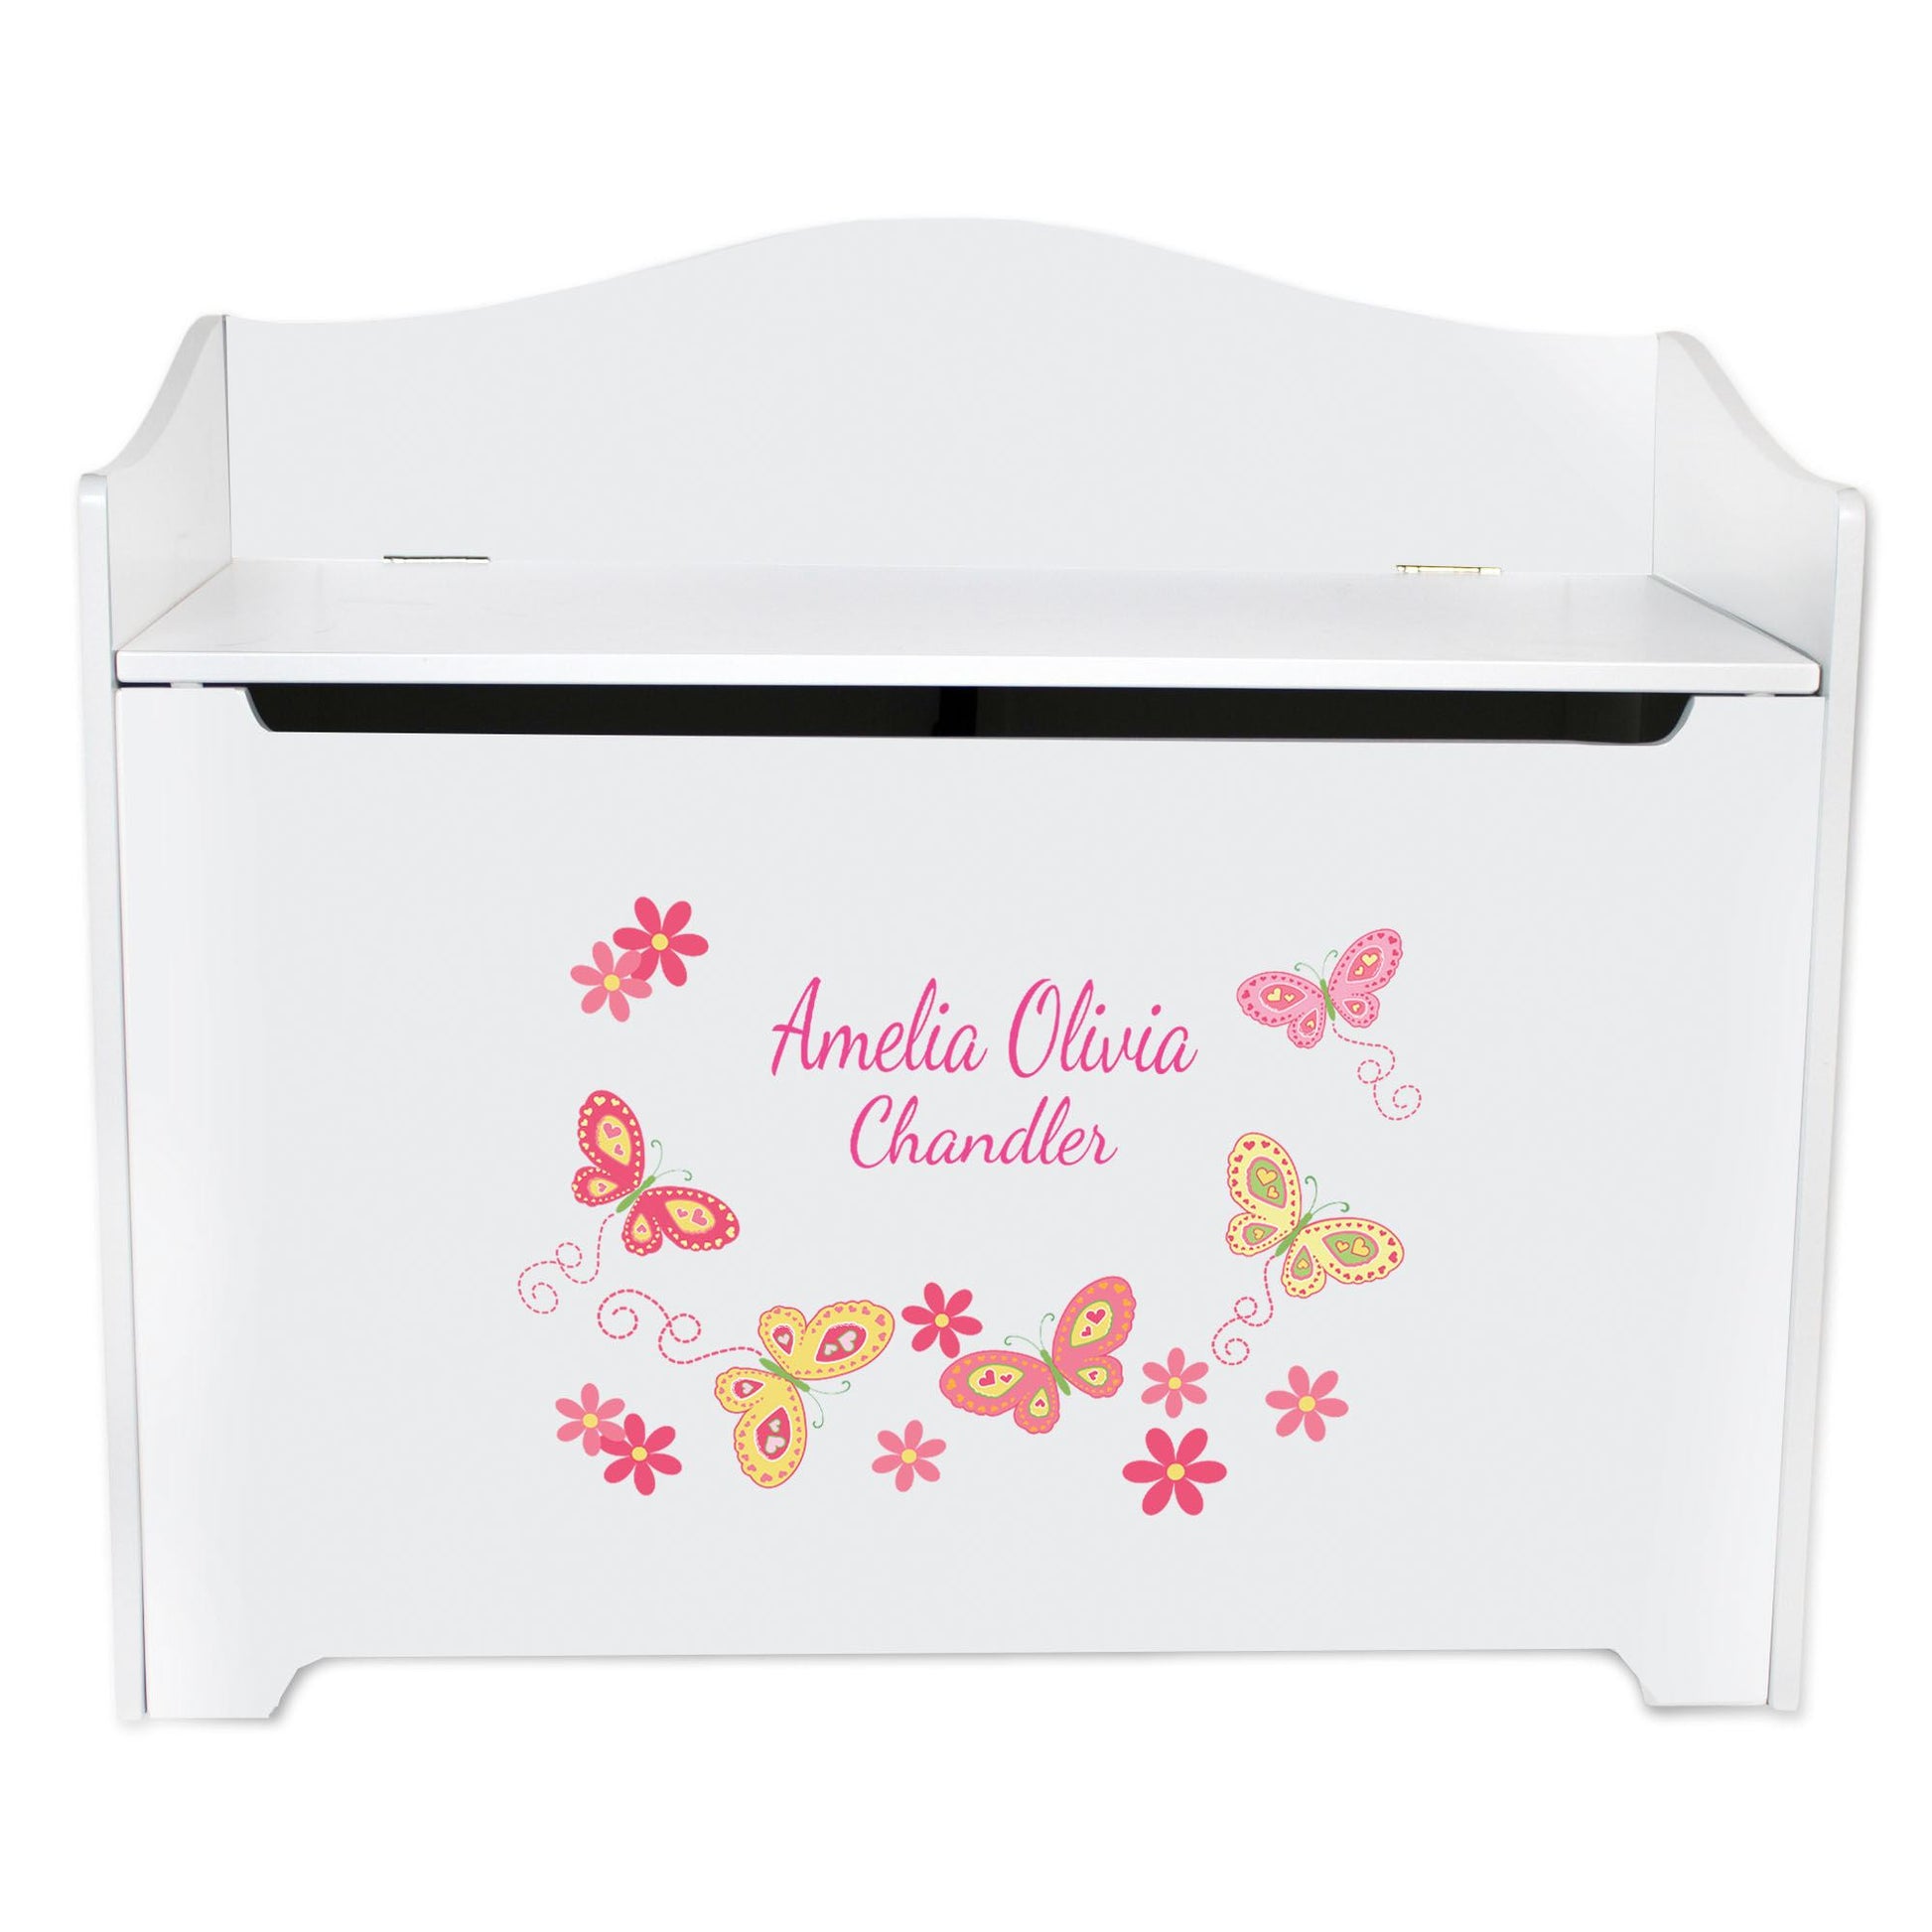 Personalized Yellow Pink Butterfly Toy Box Bench